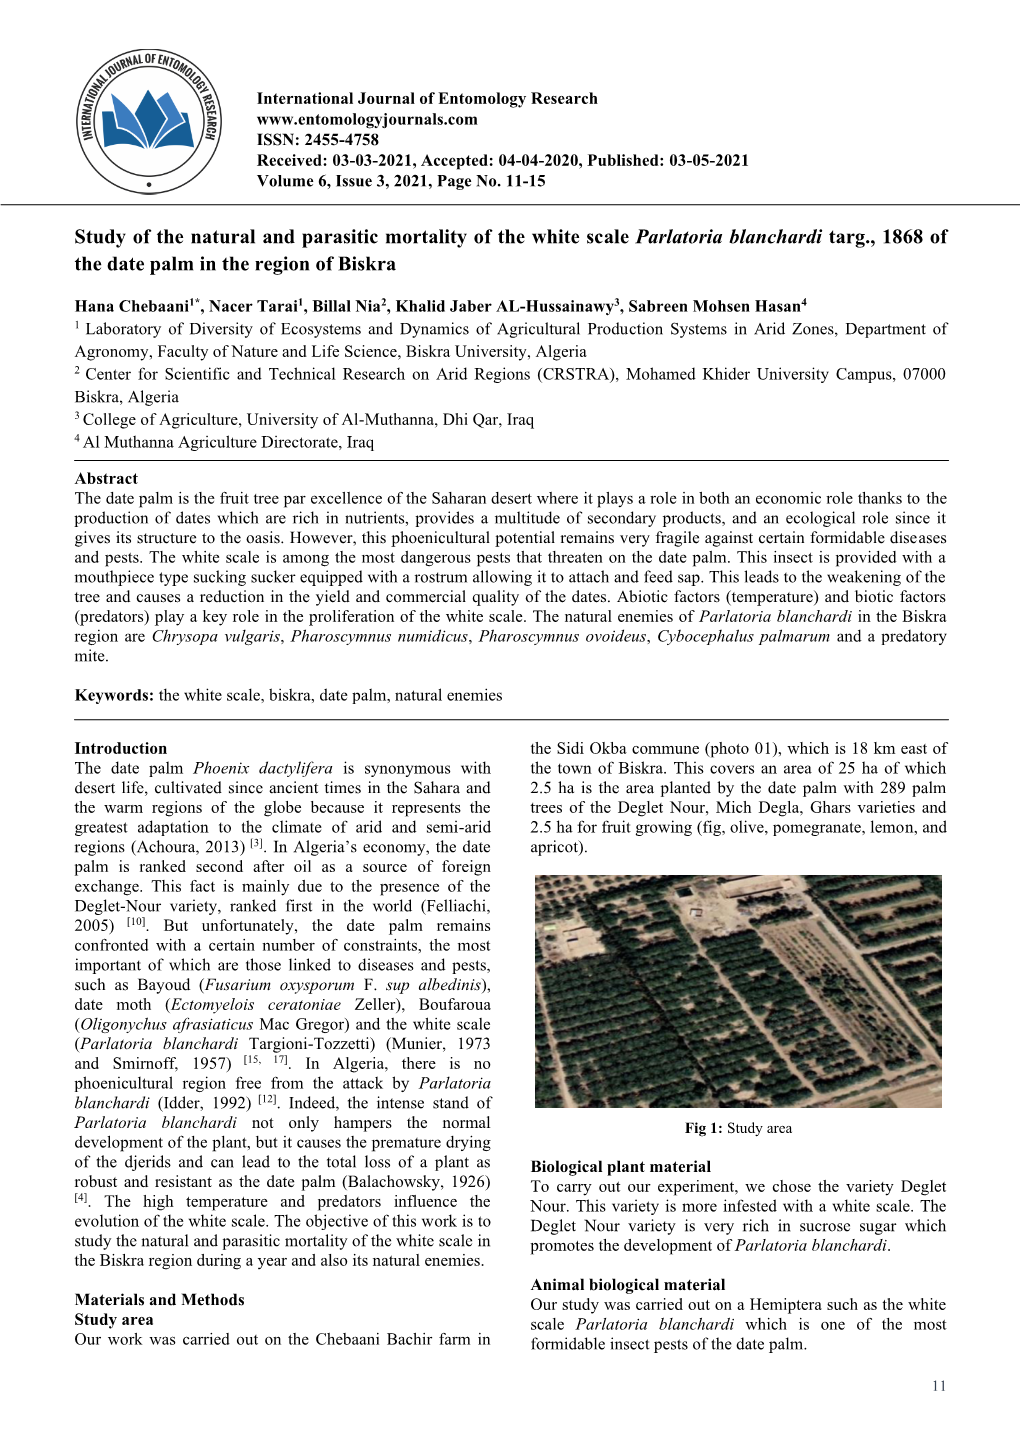 Study of the Natural and Parasitic Mortality of the White Scale Parlatoria Blanchardi Targ., 1868 of the Date Palm in the Region of Biskra